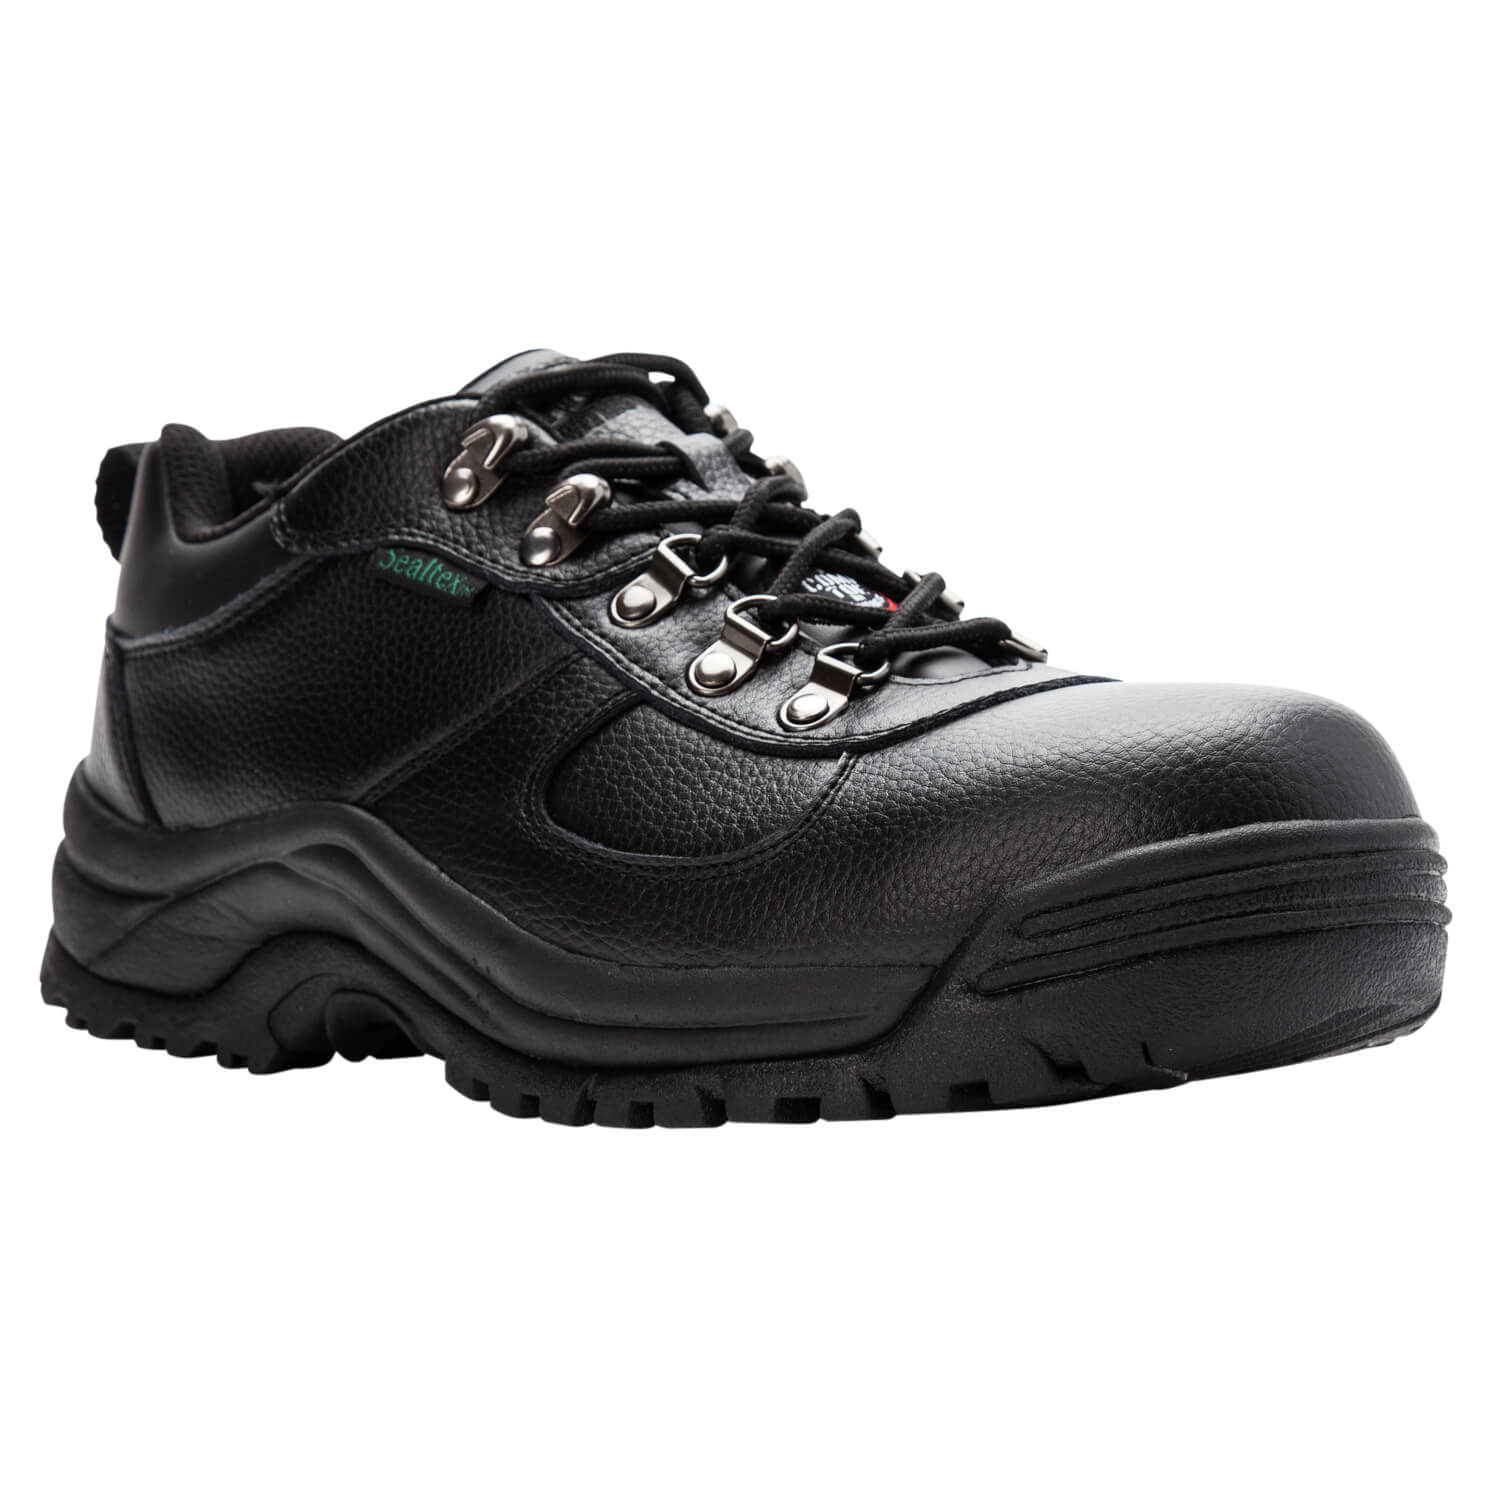 orthopedic composite toe safety shoes